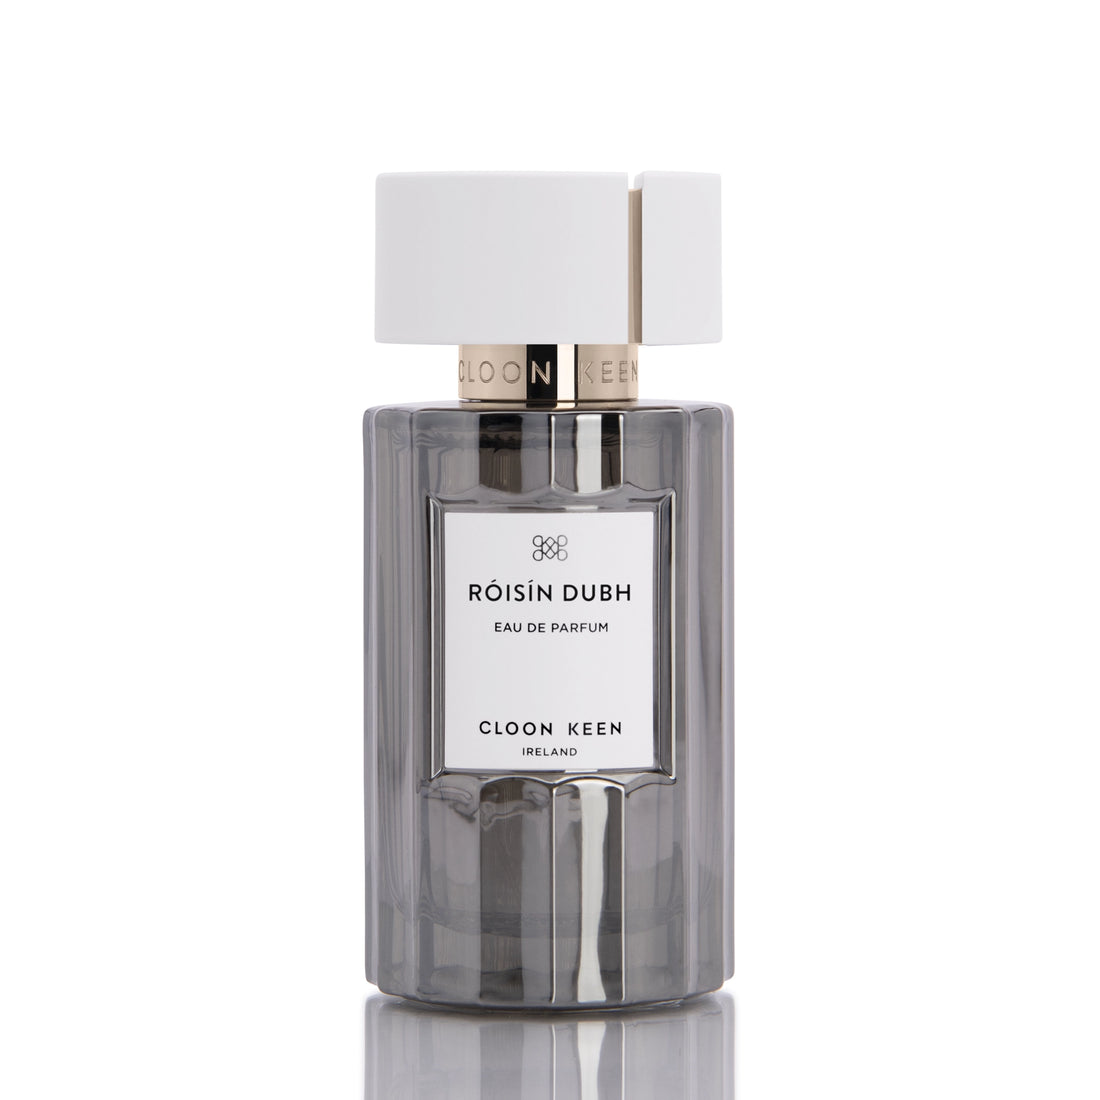 Discover Cloon Keen Róisín Dubh eau de parfum. A dusky haze of rose, entwined with ink-stained patchouli and smoky incense. Best Independent Perfume 2019.